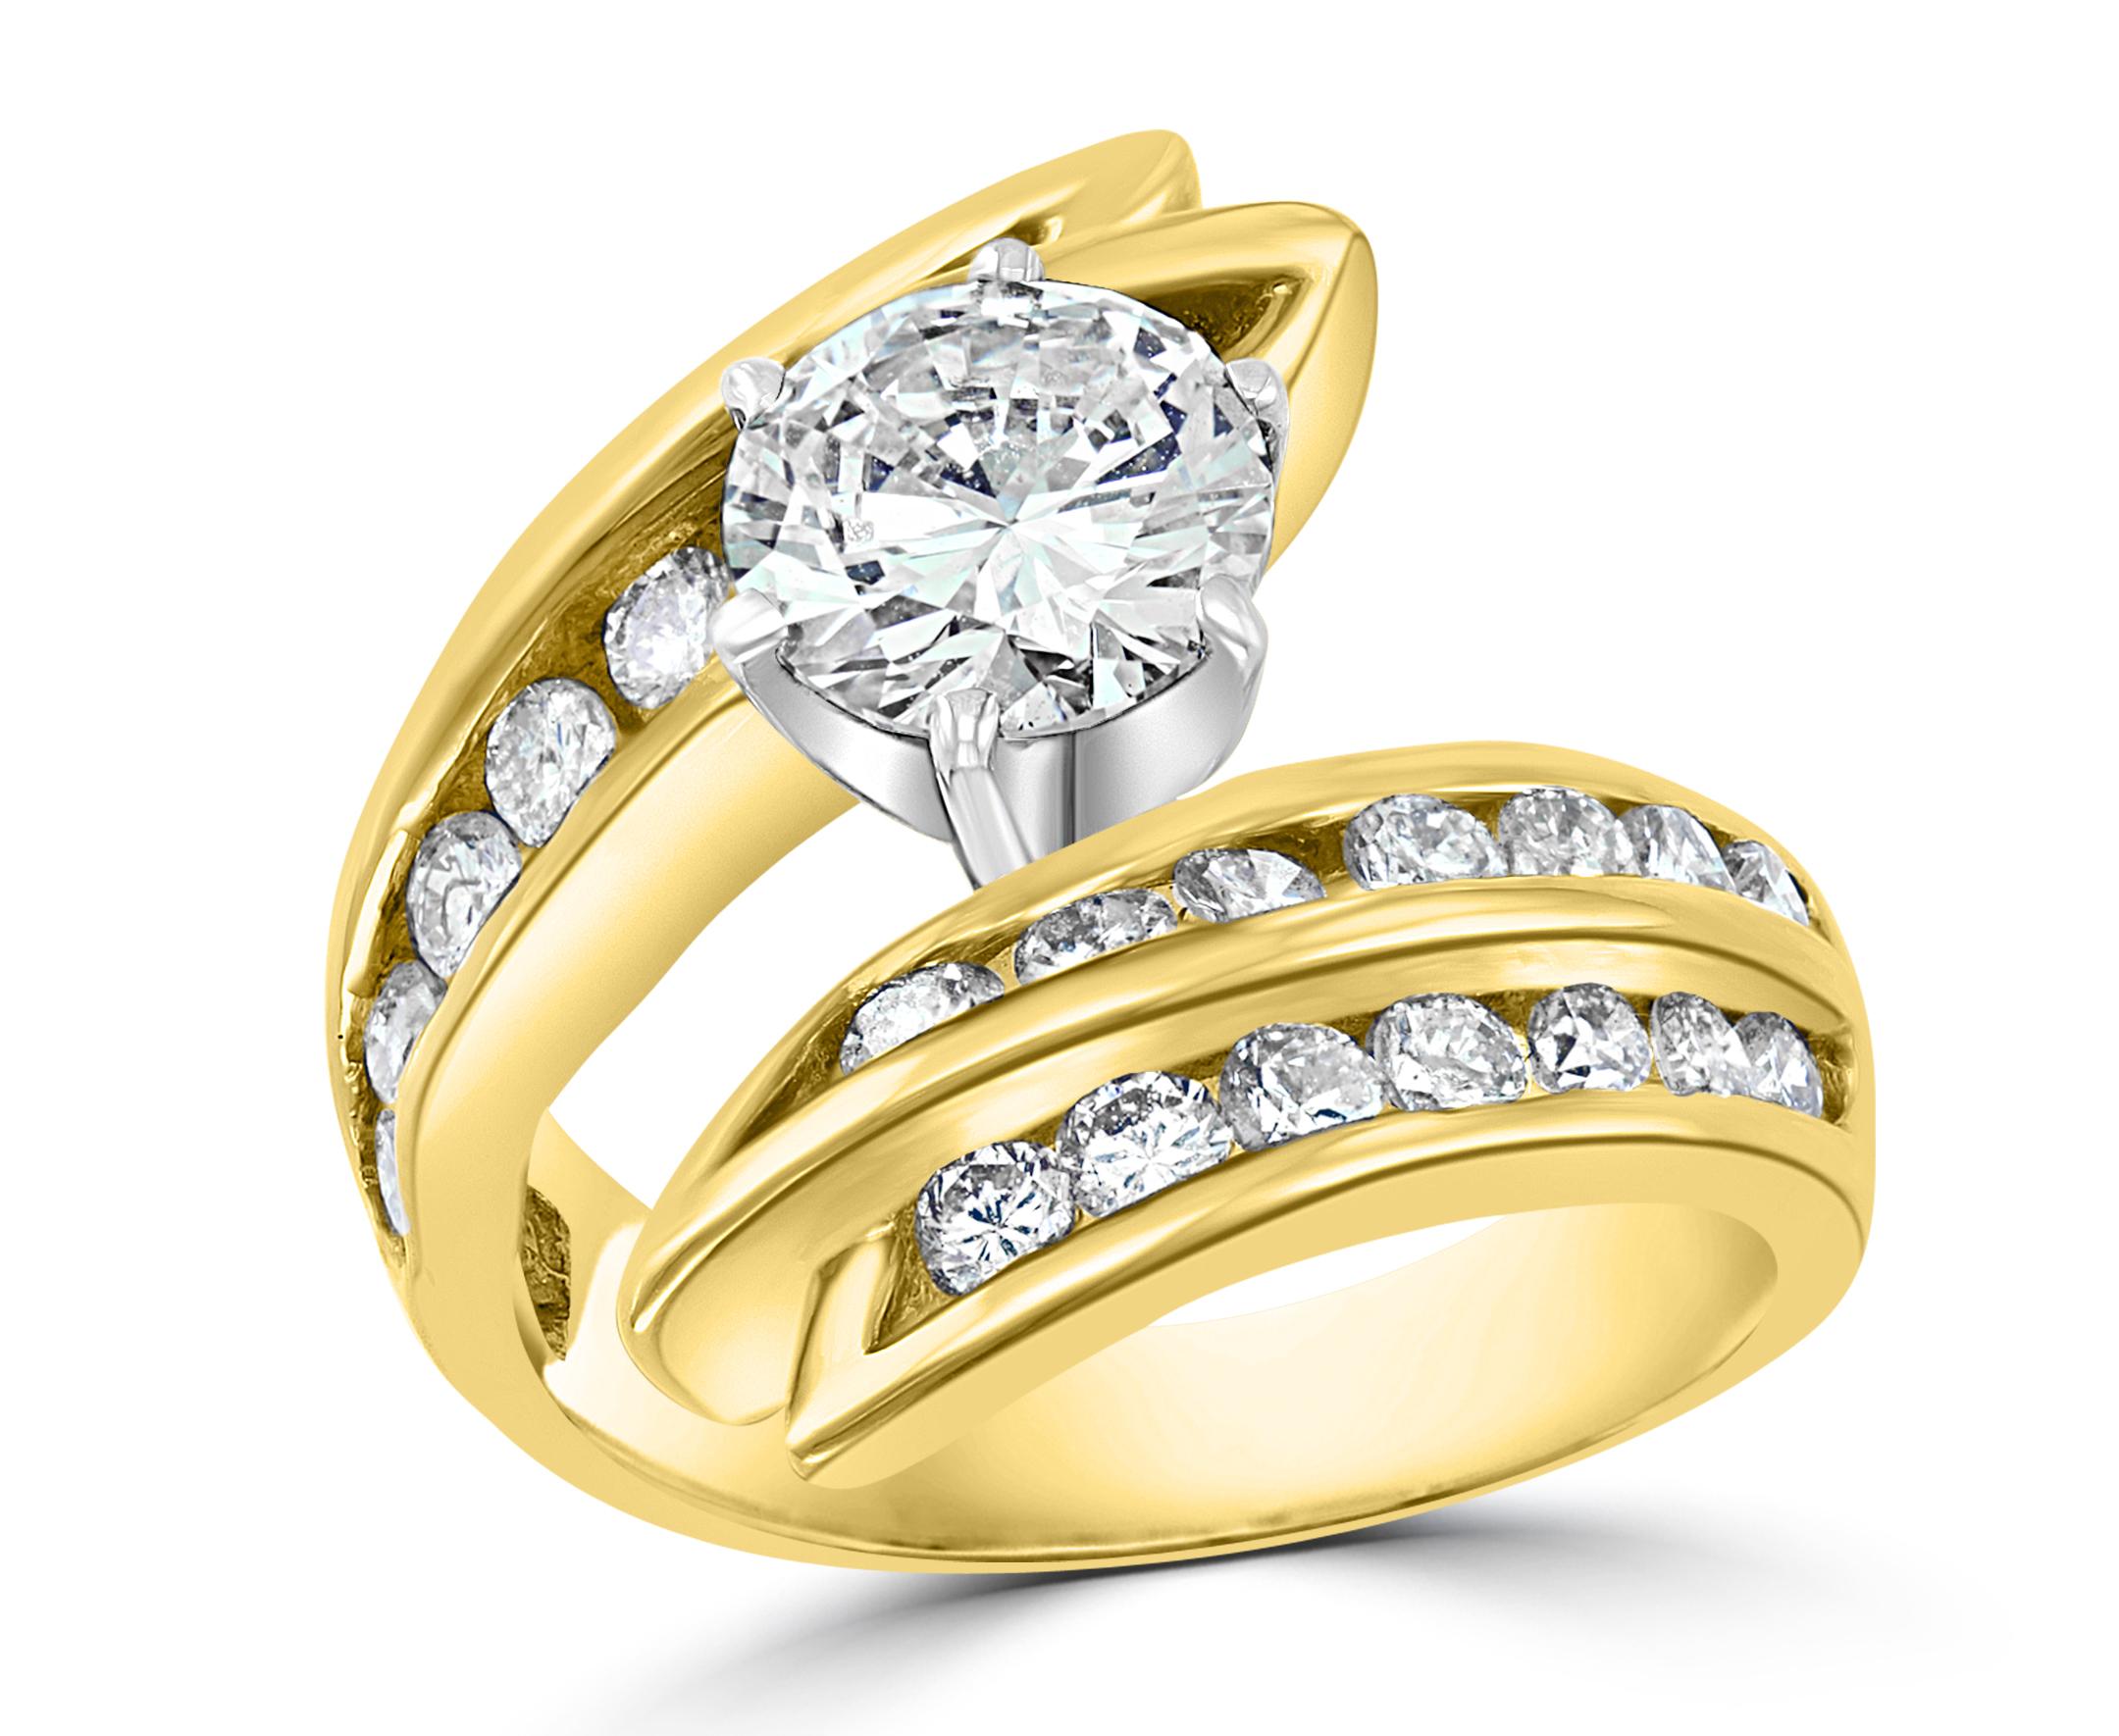 1.5 carat solitaire engagement ring